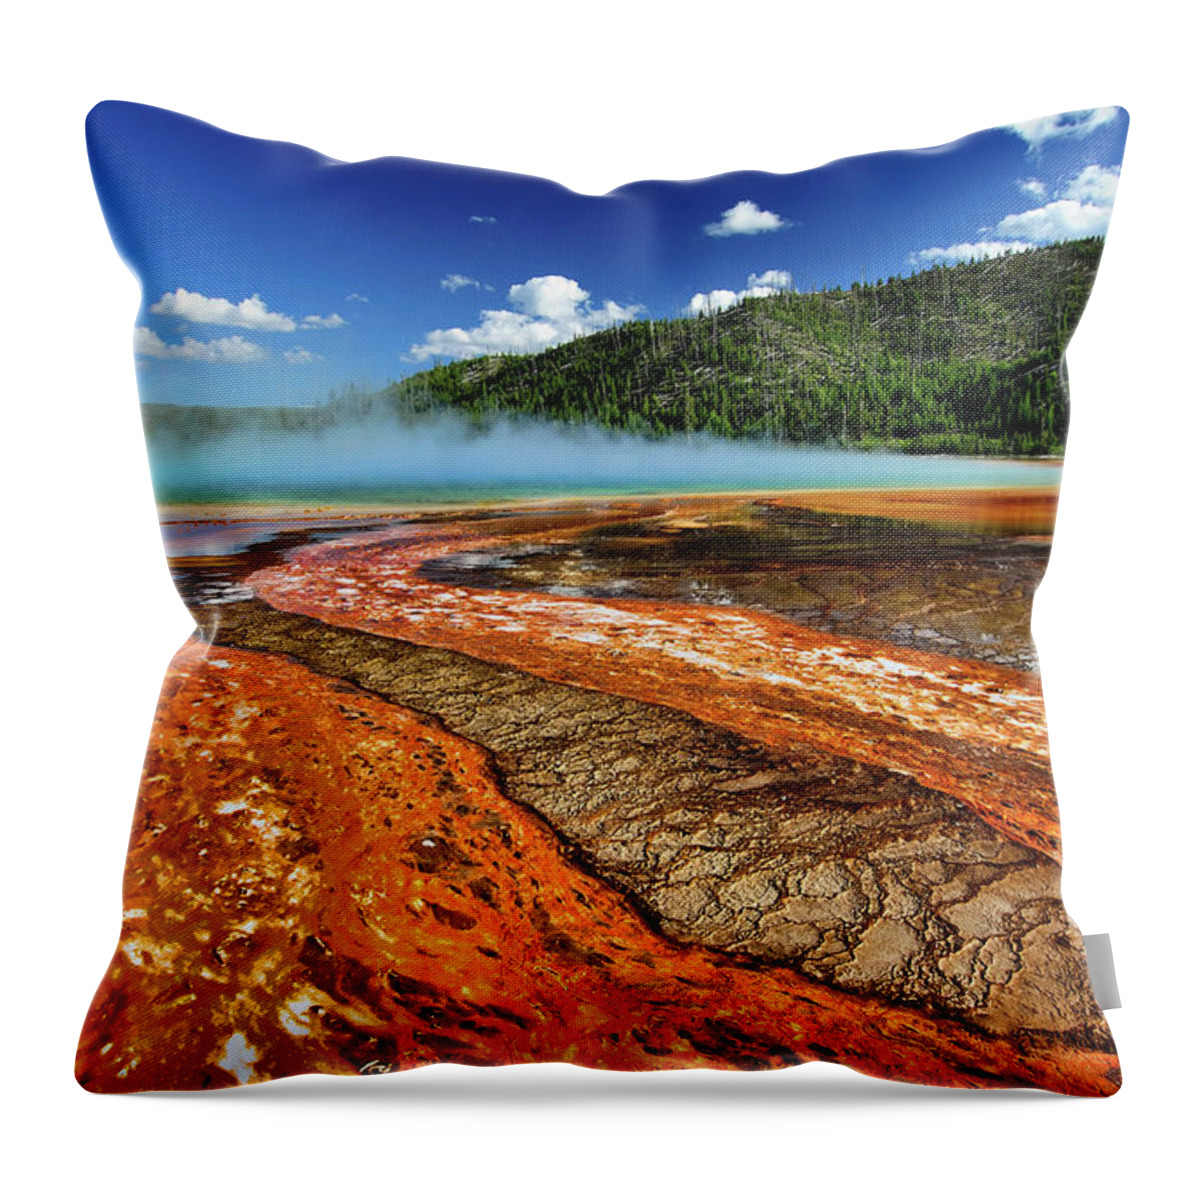 Tranquility Throw Pillow featuring the photograph Grand Prismatic Spring And Mountain by Noppawat Tom Charoensinphon